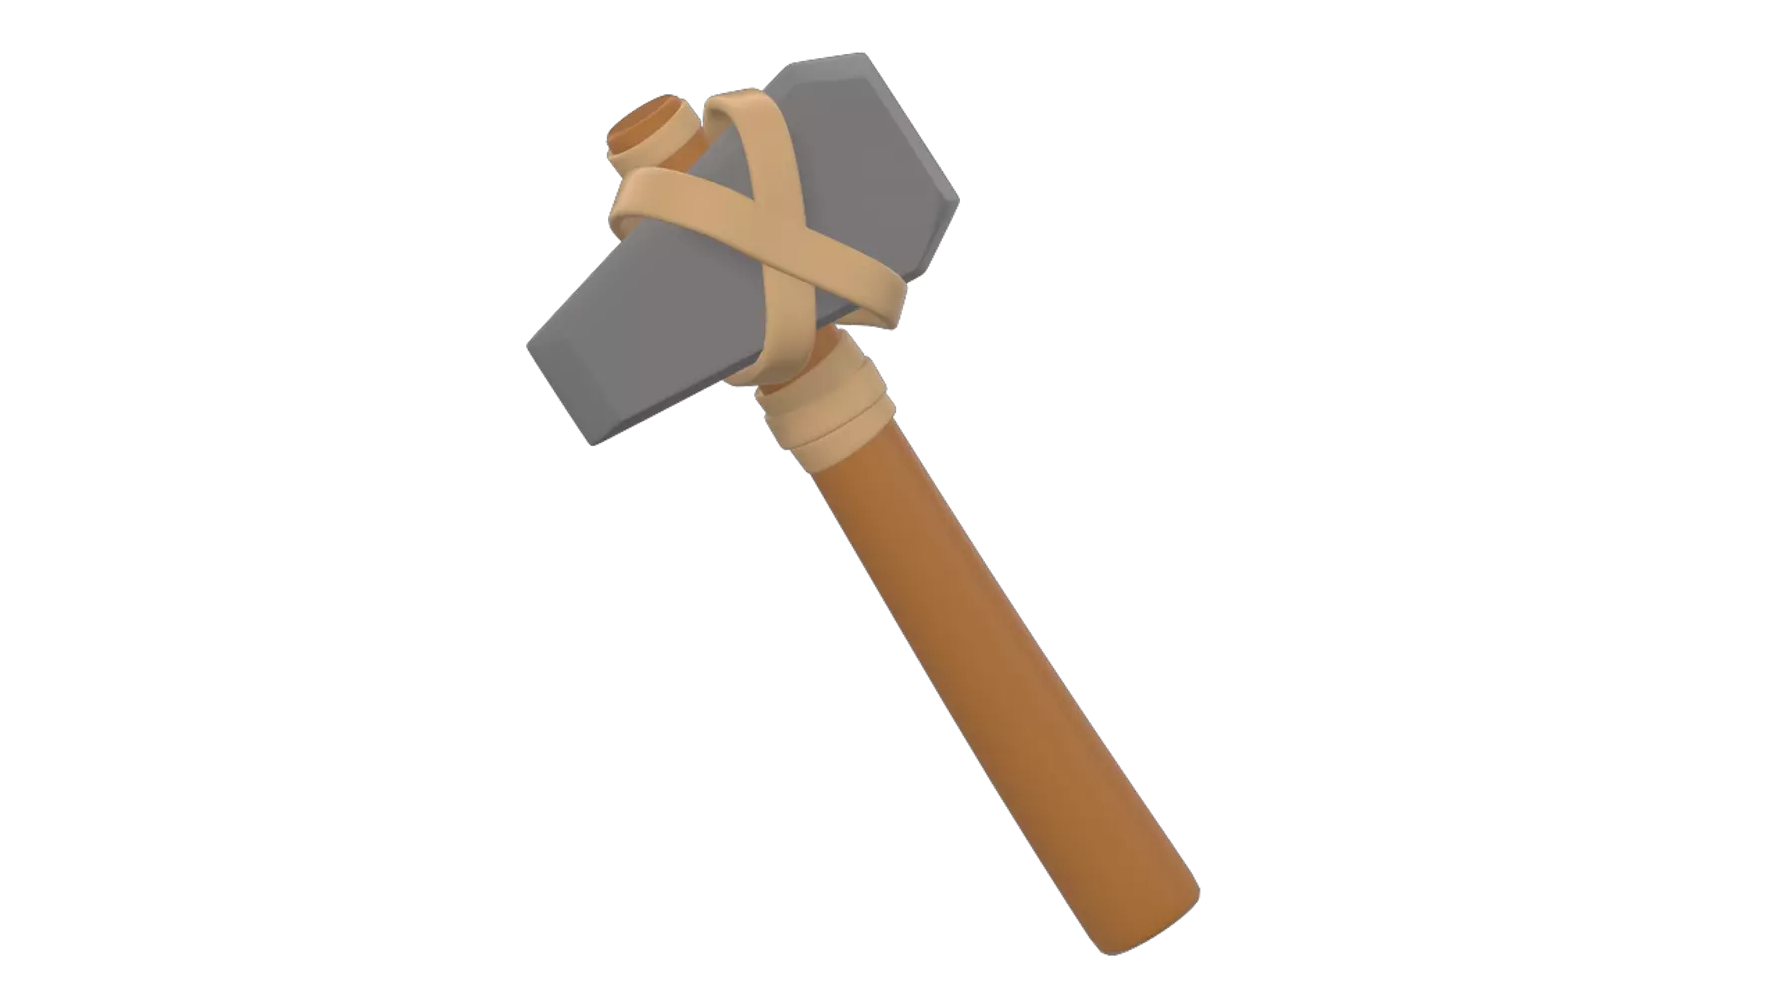 Stone Age Hammer 3D Graphic